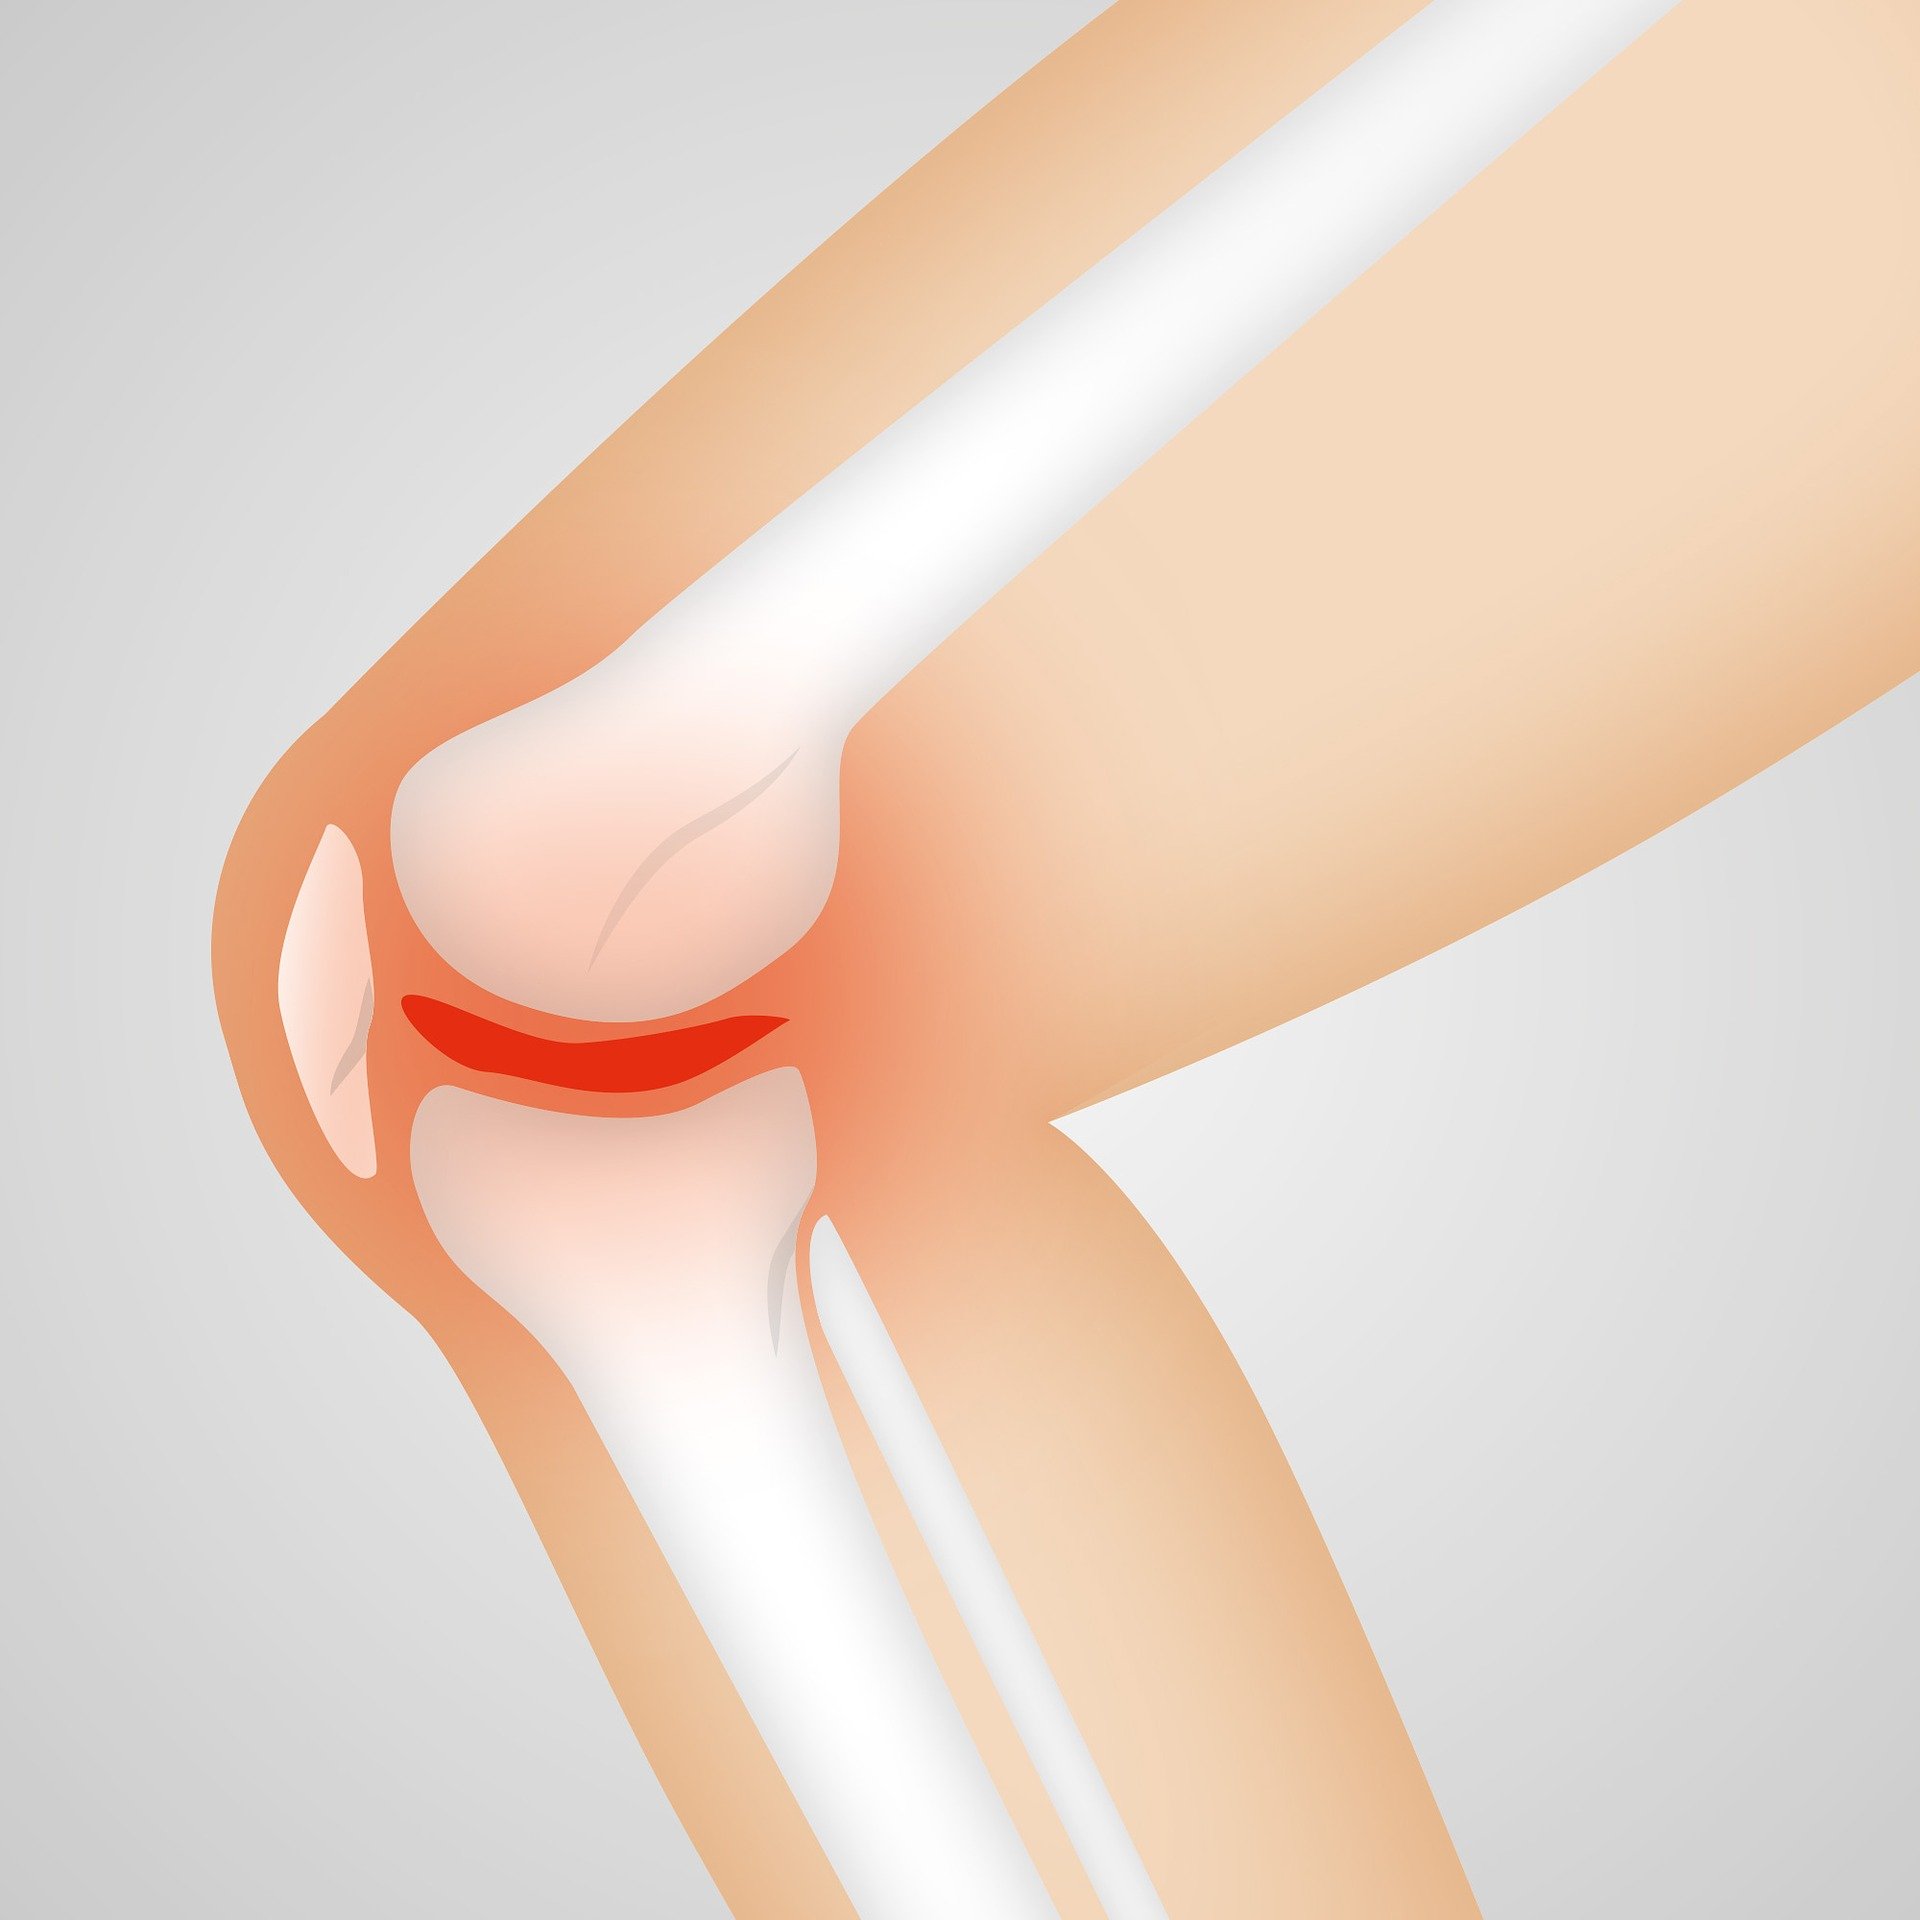 Can I get Social Security Disability for my torn meniscus?